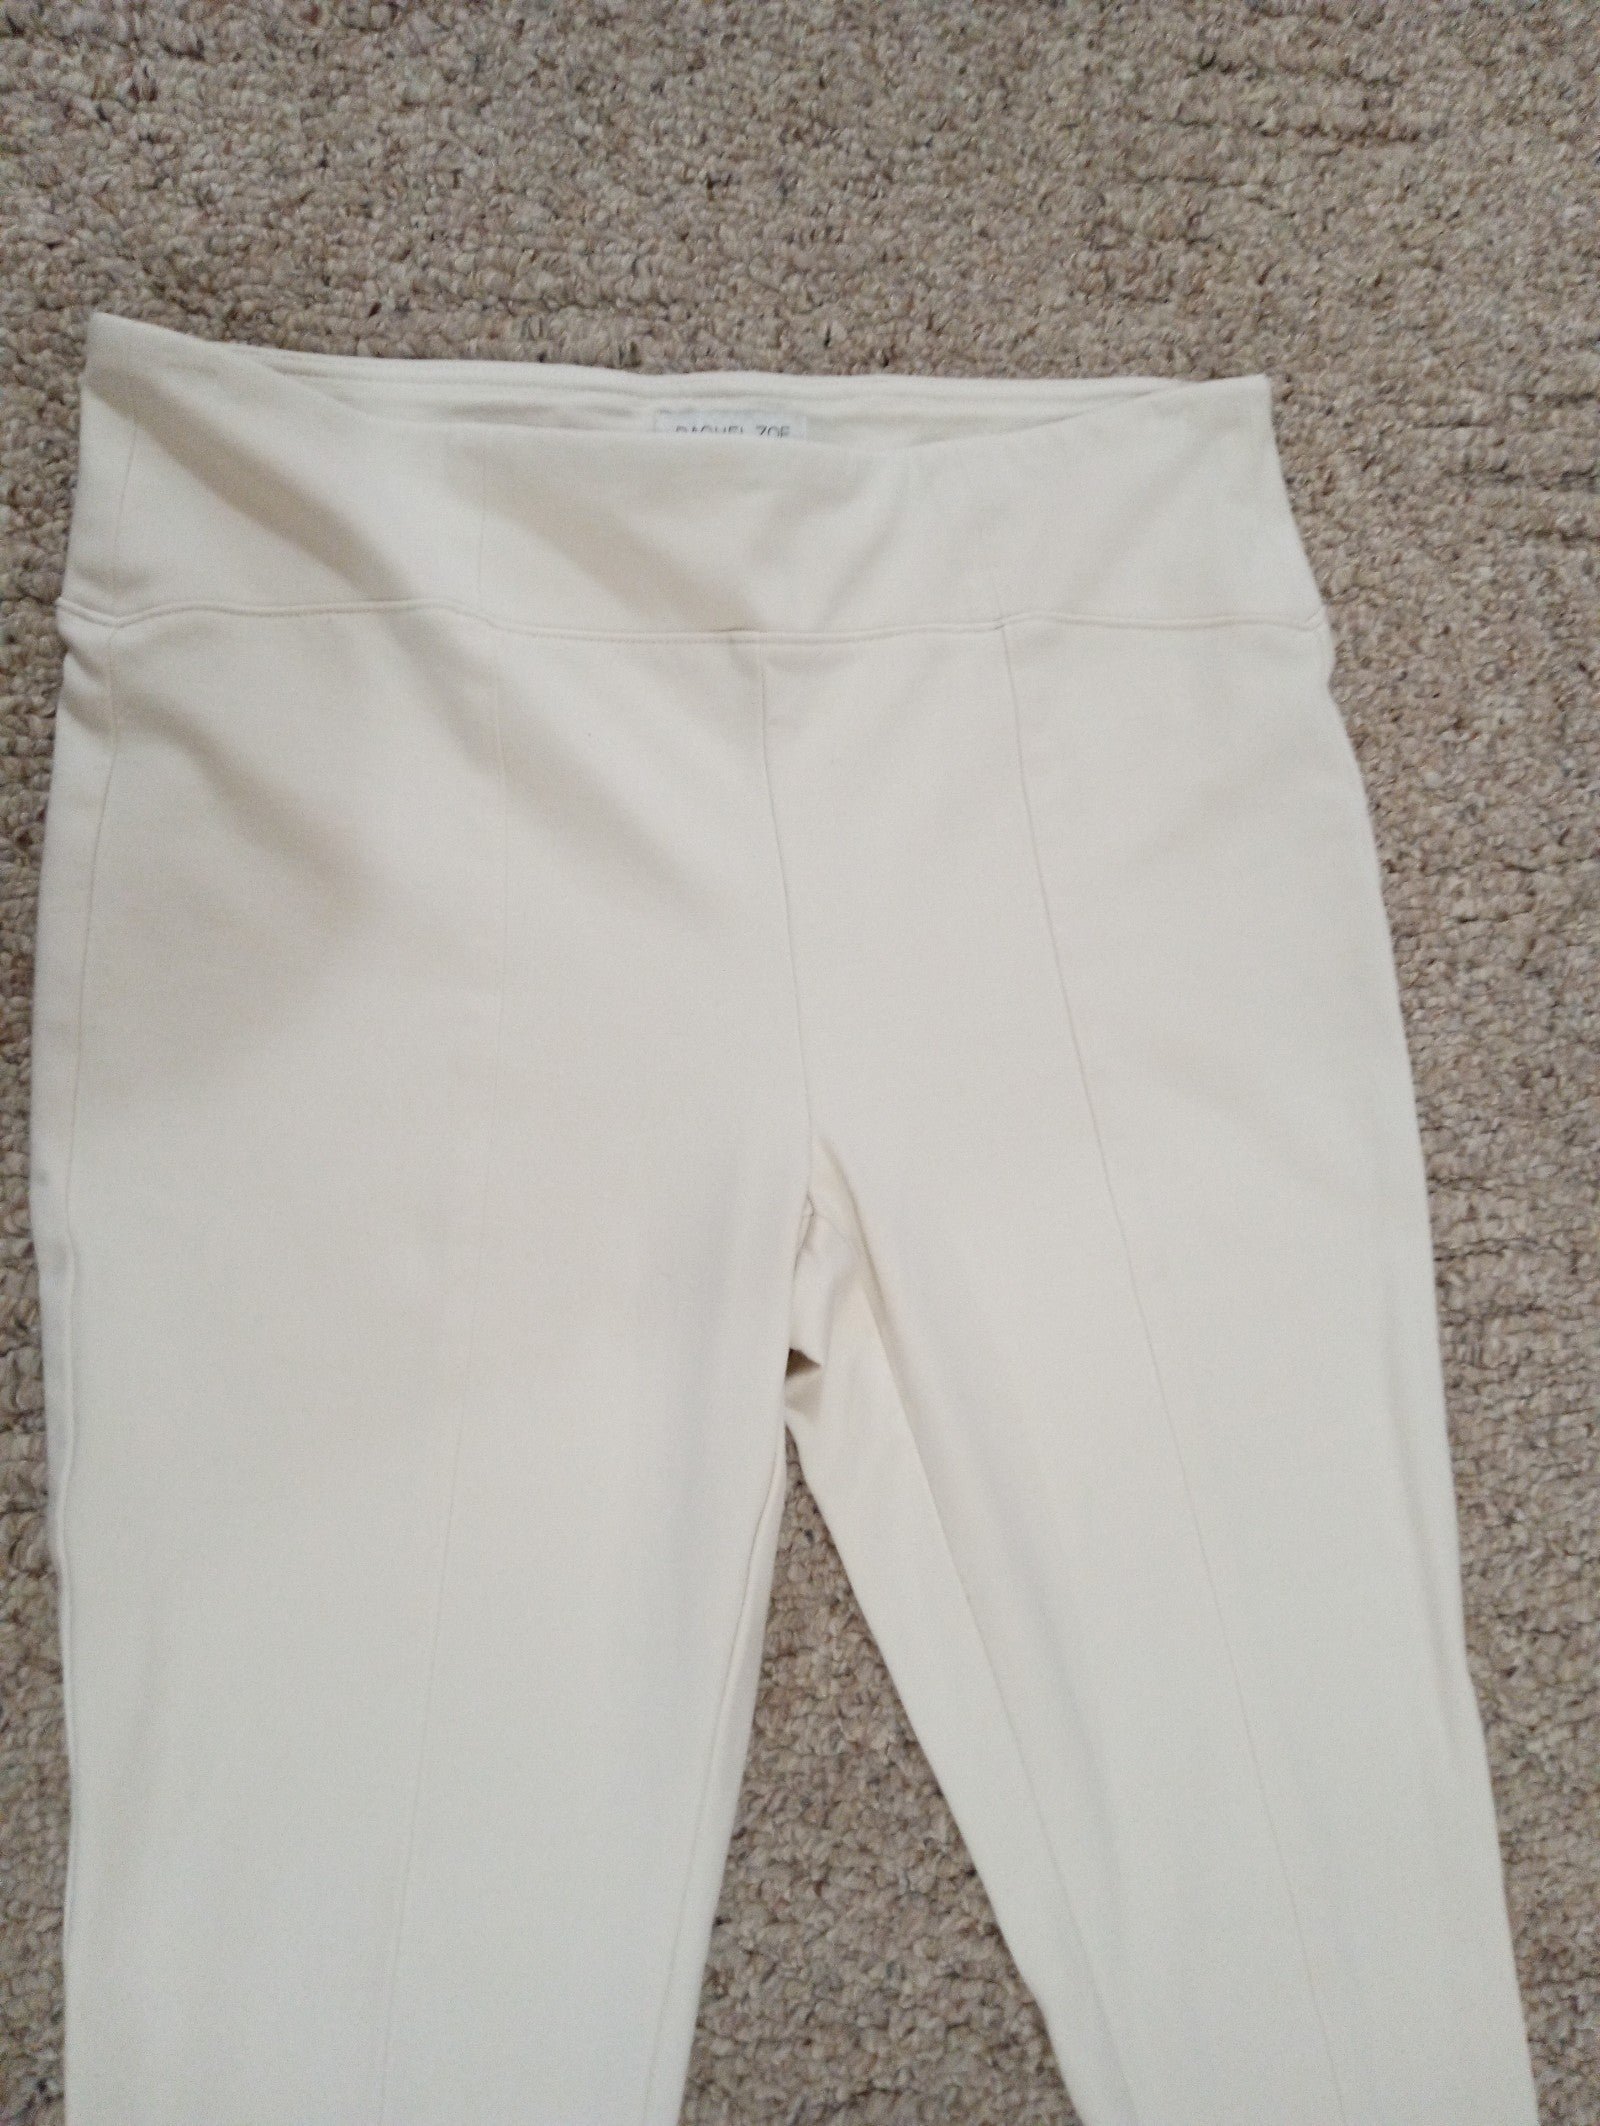 where to buy  RACHEL ZOE tailored high waisted cream ankle lounge pants NV5cy3Itg hot sale